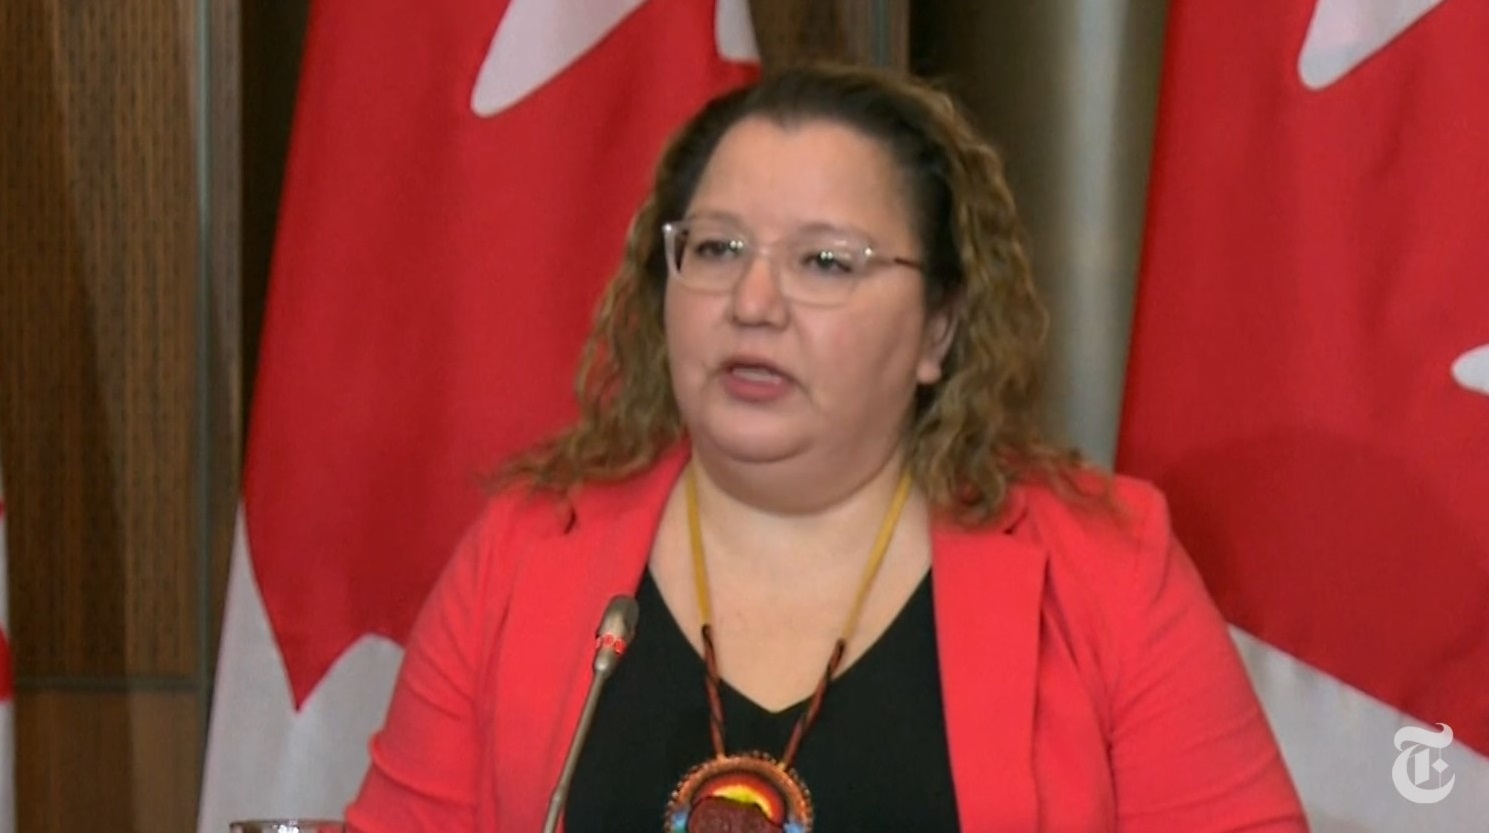 Cindy Woodhouse, the Manitoba regional chief at the Assembly of First Nations. Screen capture from video. Amber Bracken for The New York Times